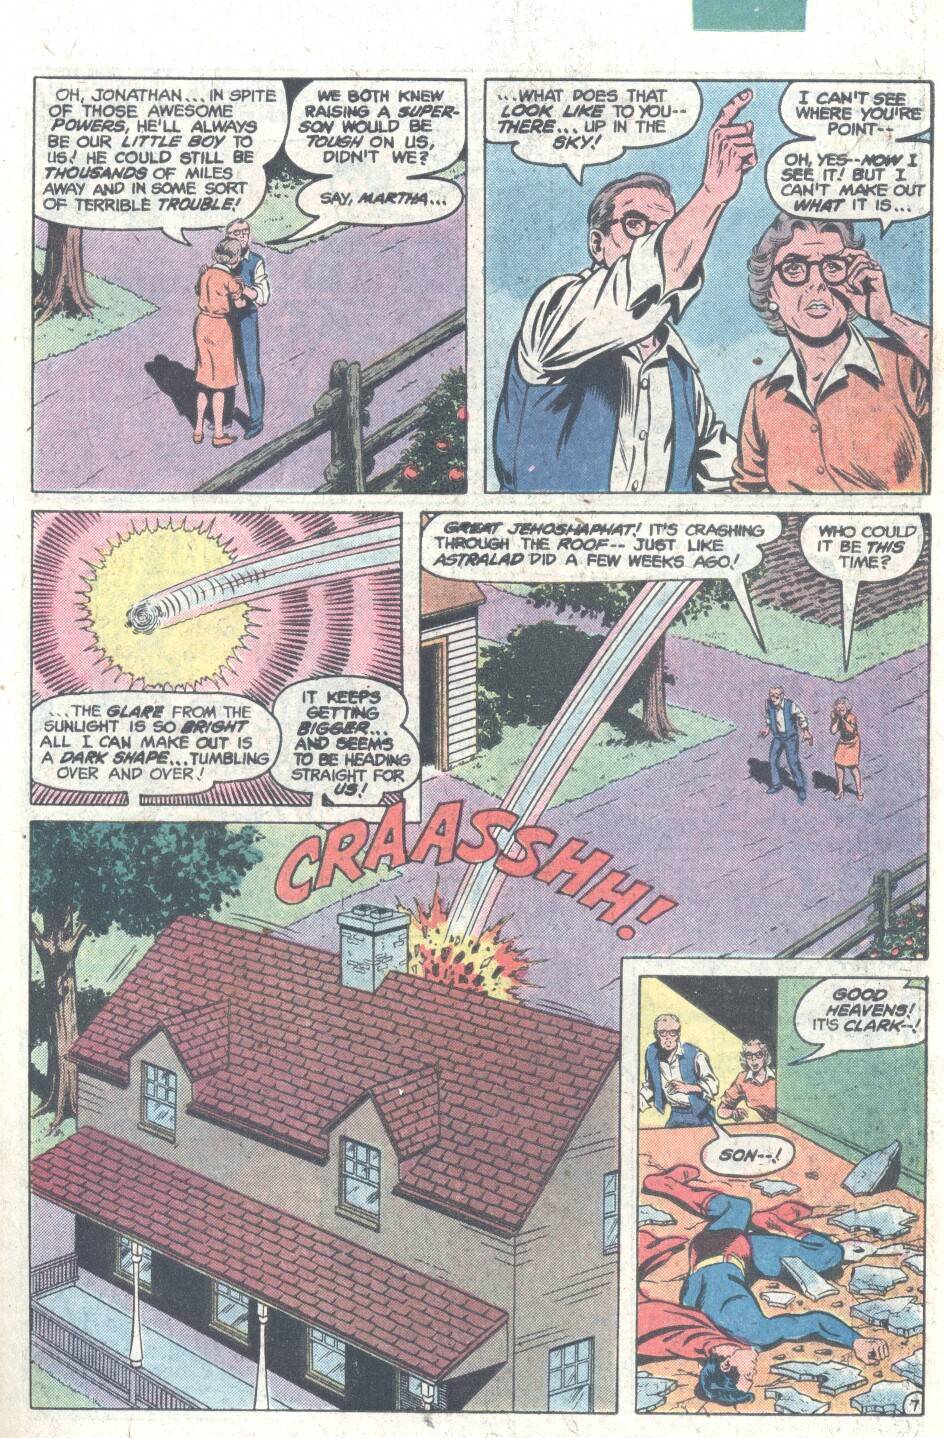 The New Adventures of Superboy 5 Page 7